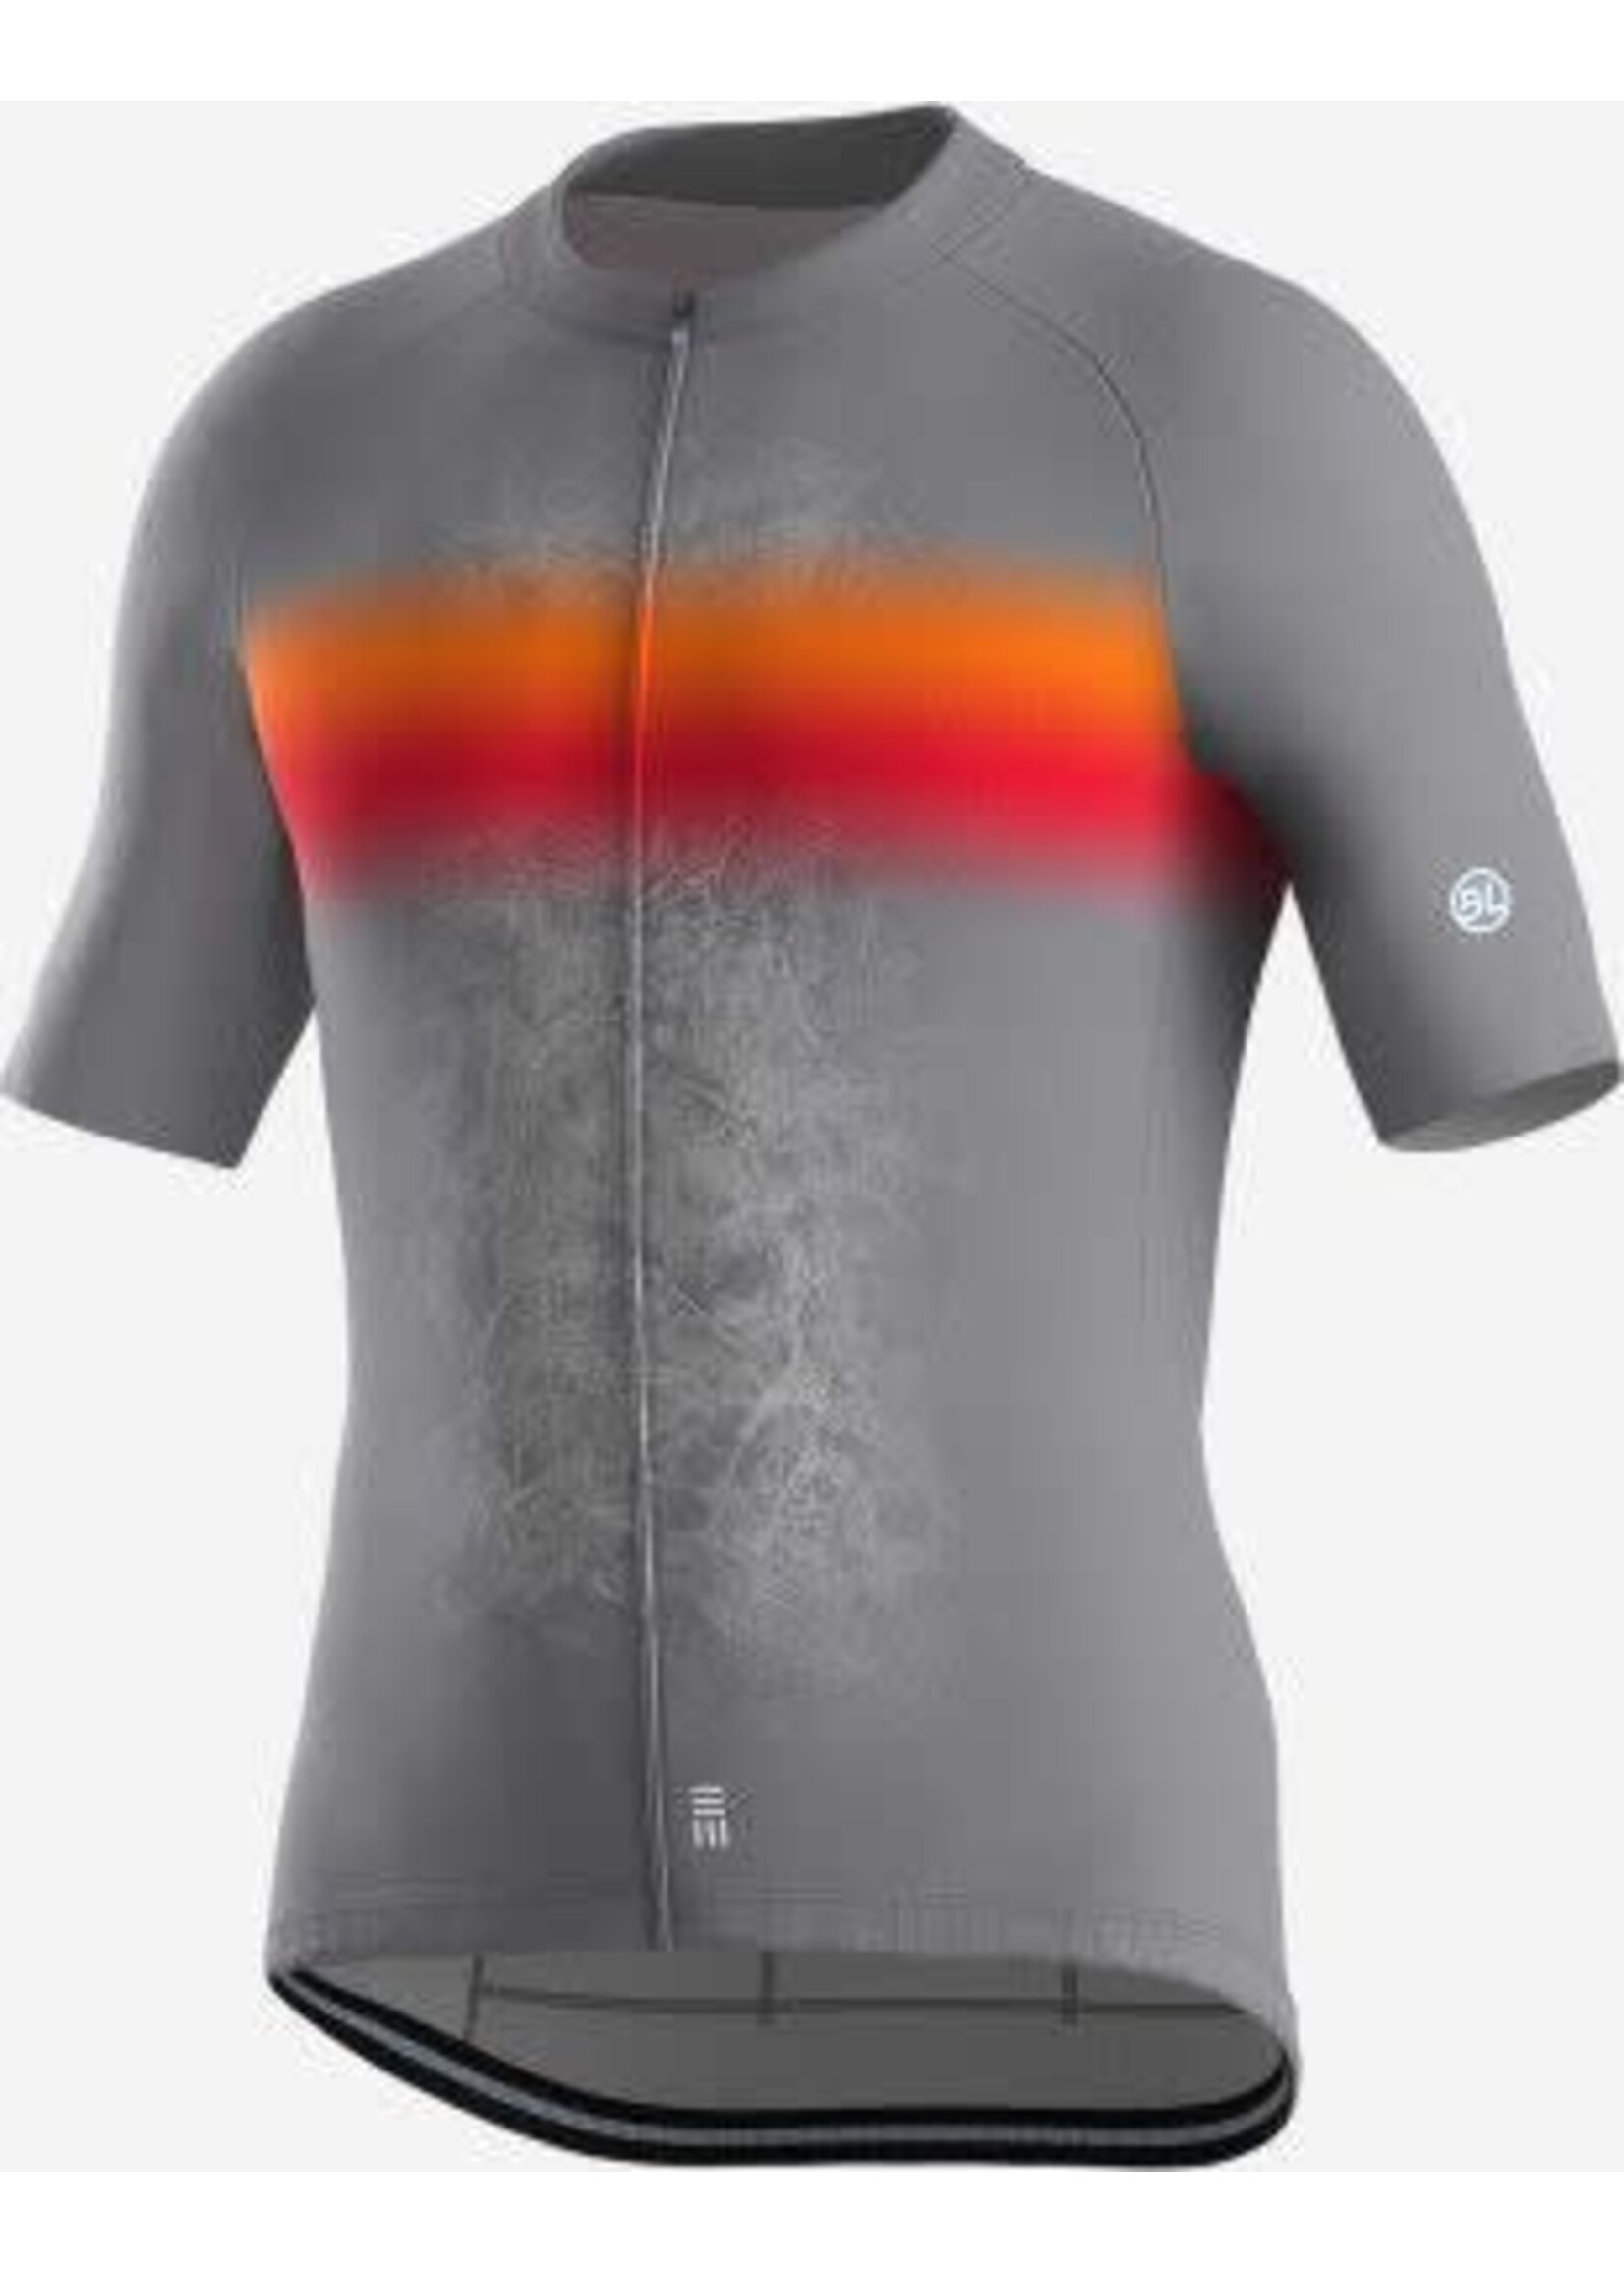 Bicycle-line BL Treviso S3 Short Sleeve Jersey